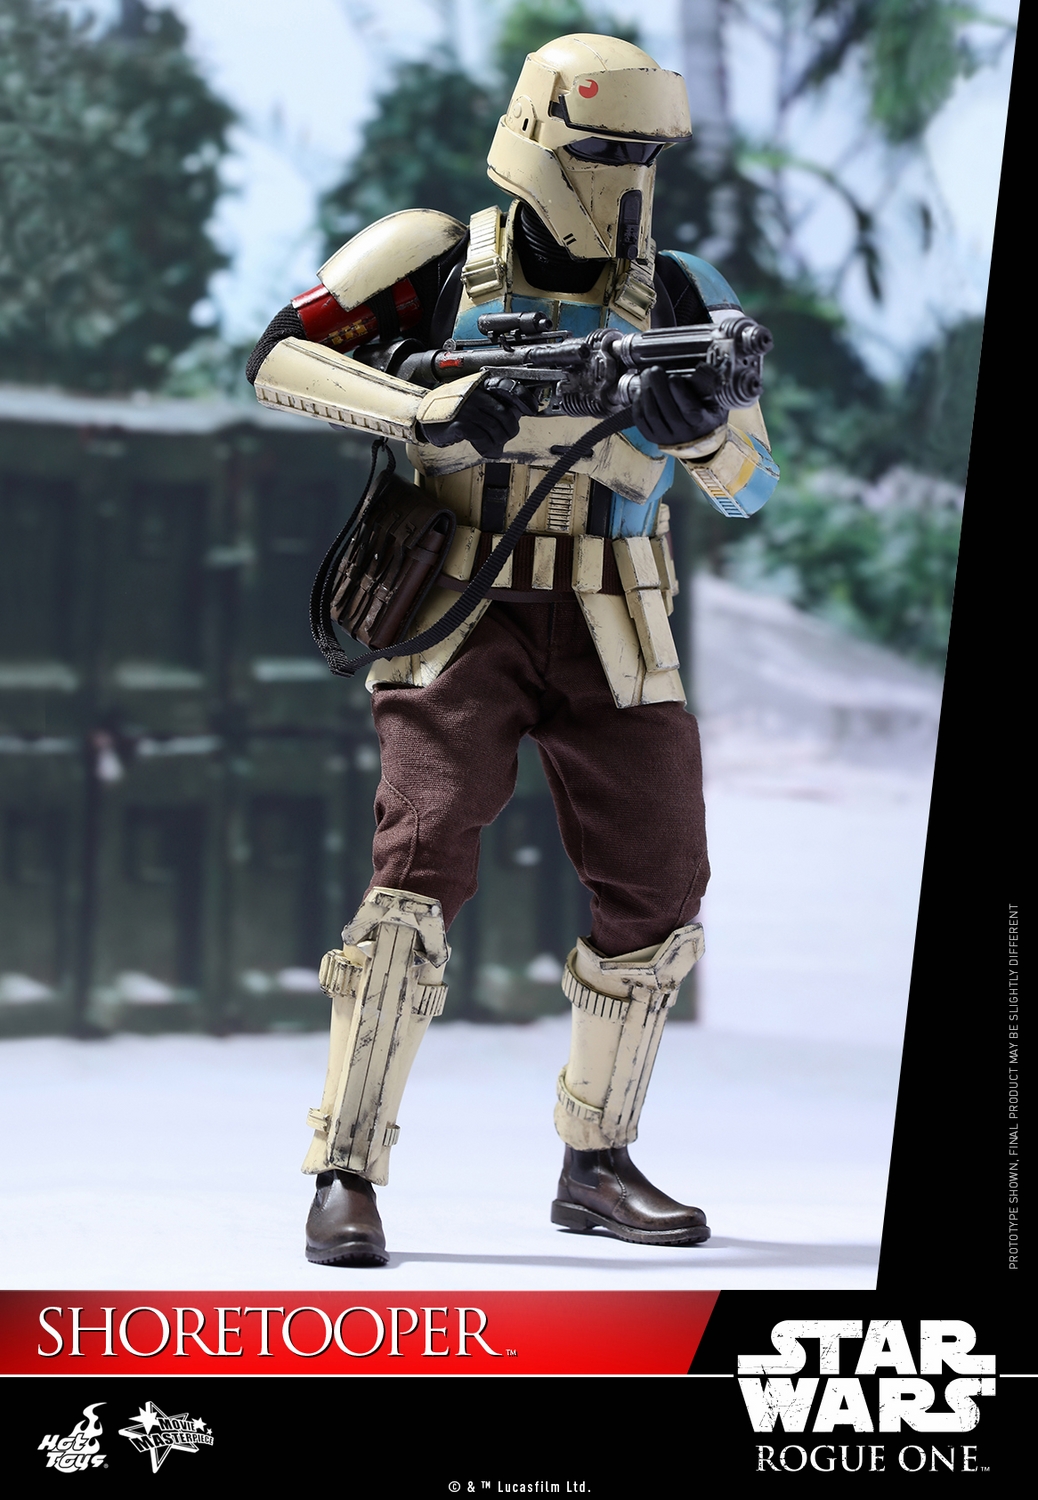 hot-toys-star-wars-rogue-one-shoretrooper-collectible-figure-092916-017.jpg